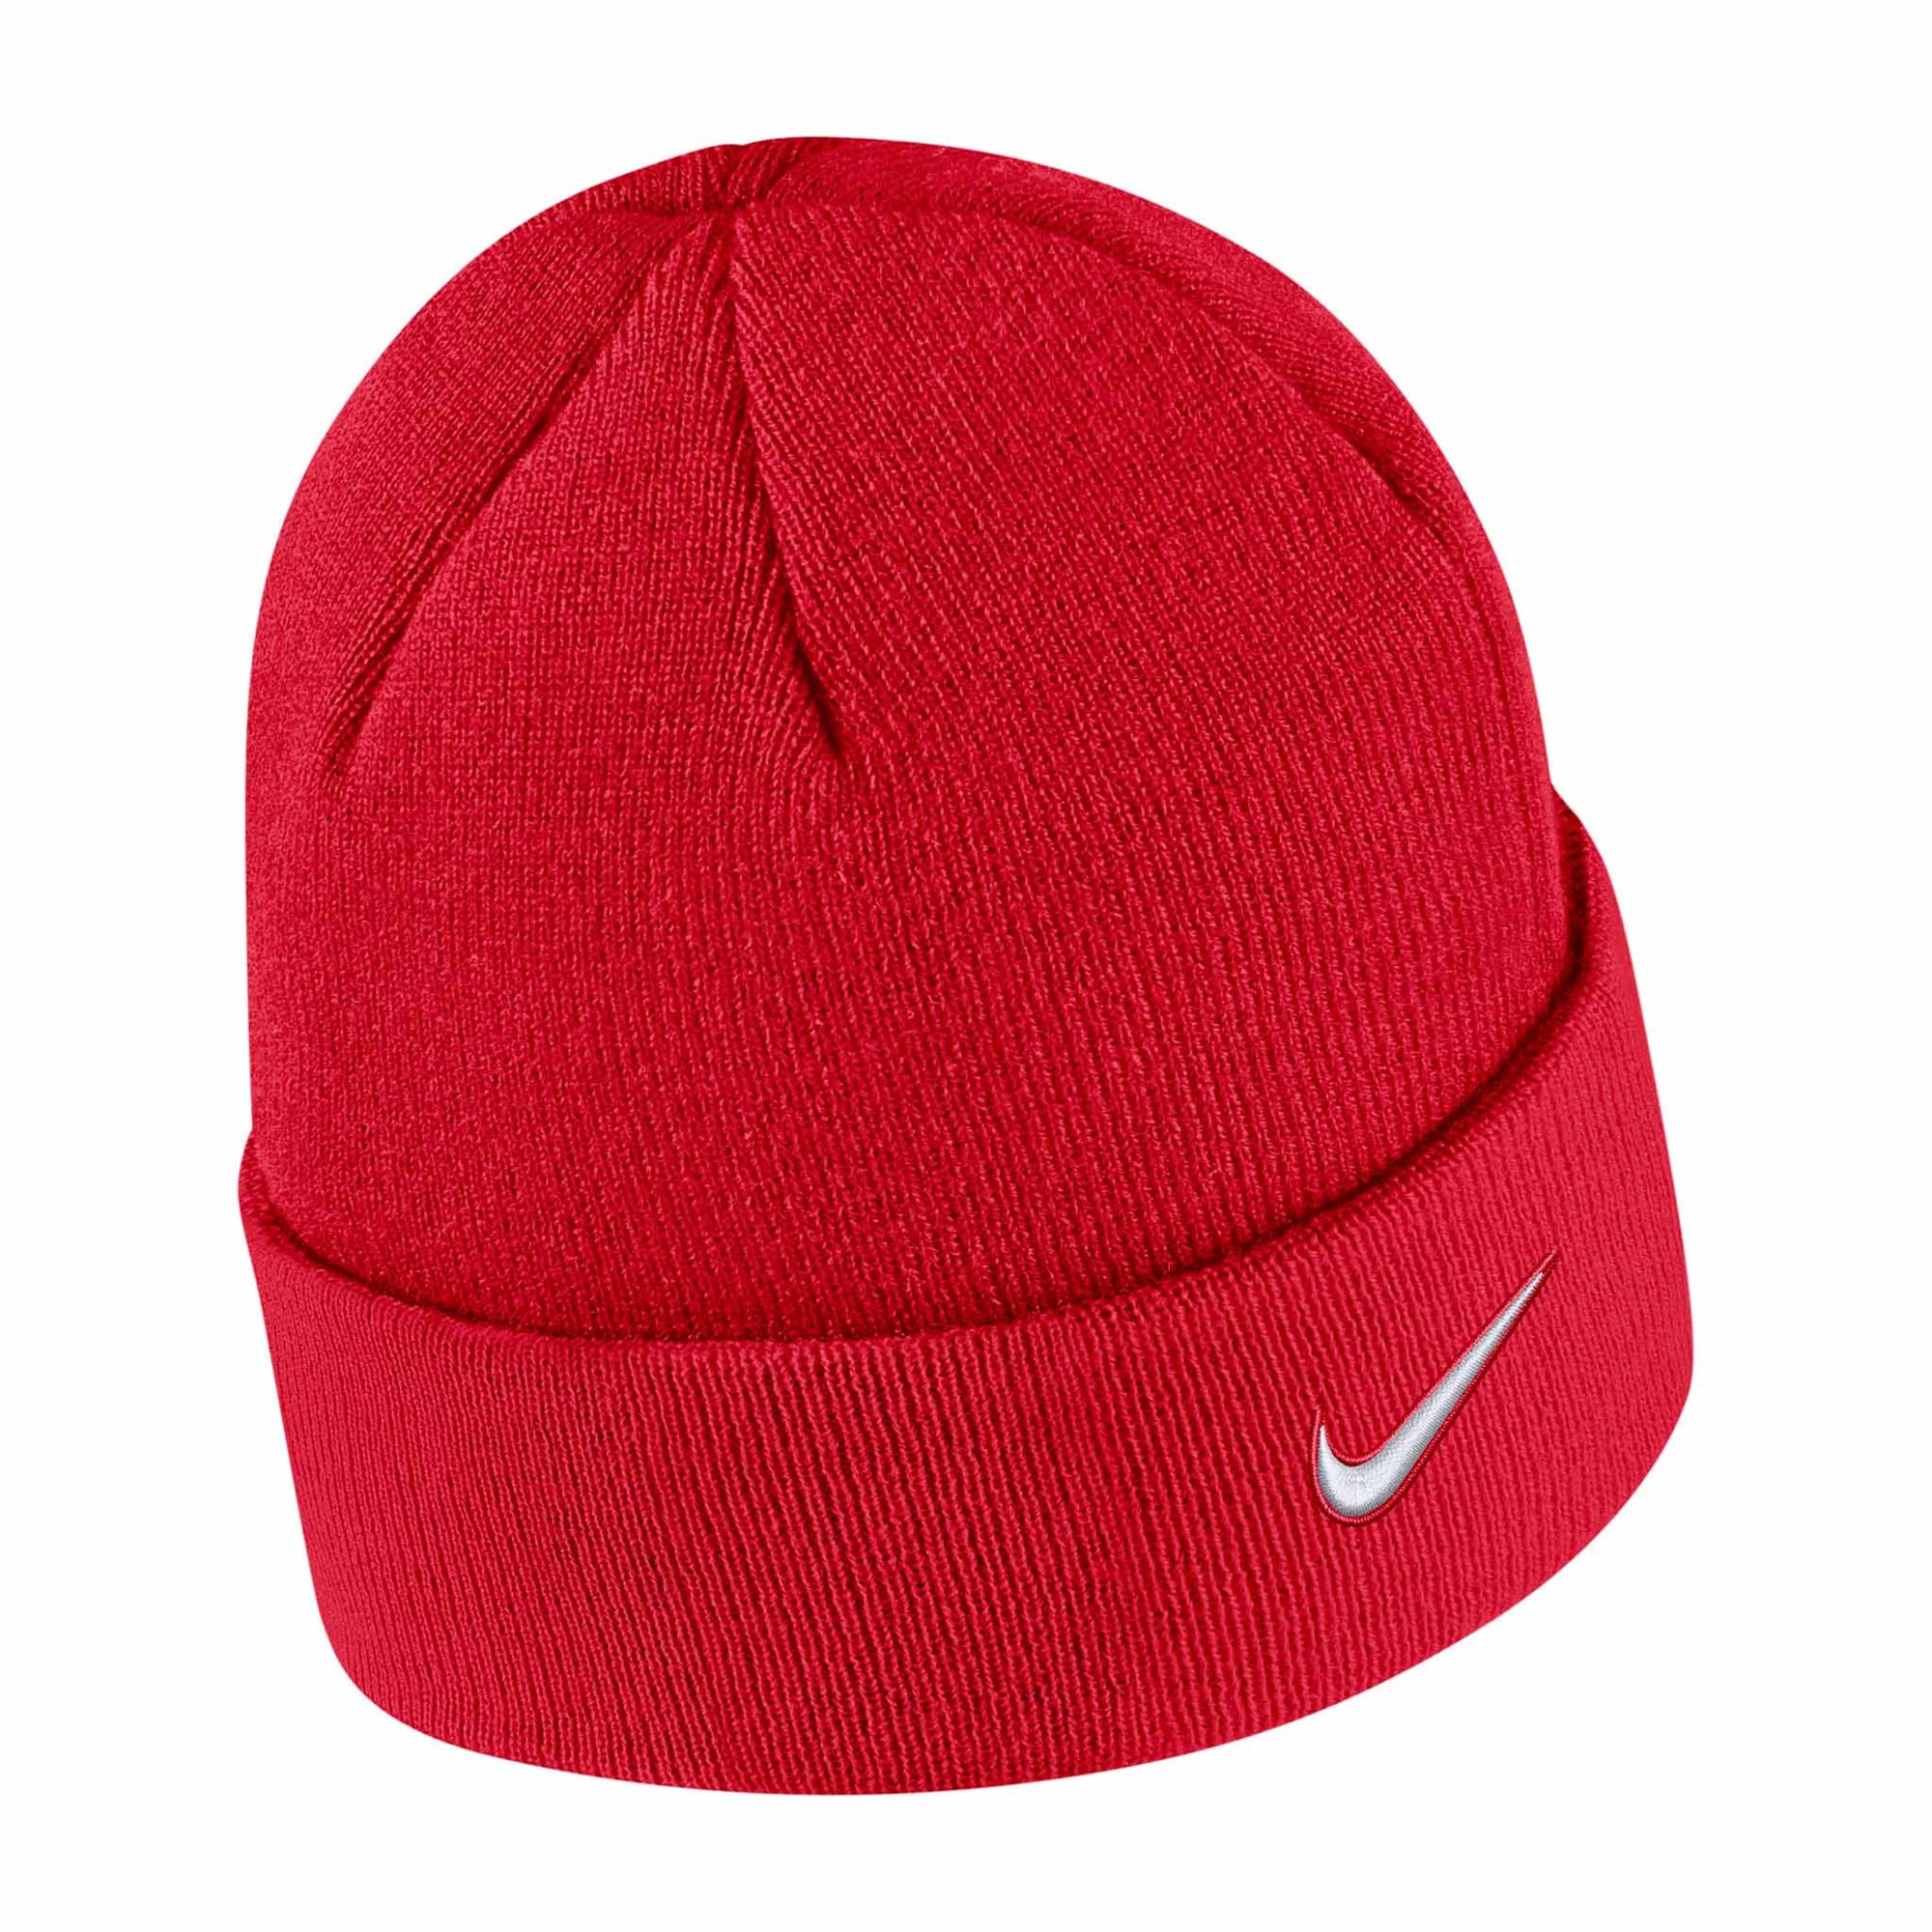 Nike Canada Soccer tuque à revers - Rouge